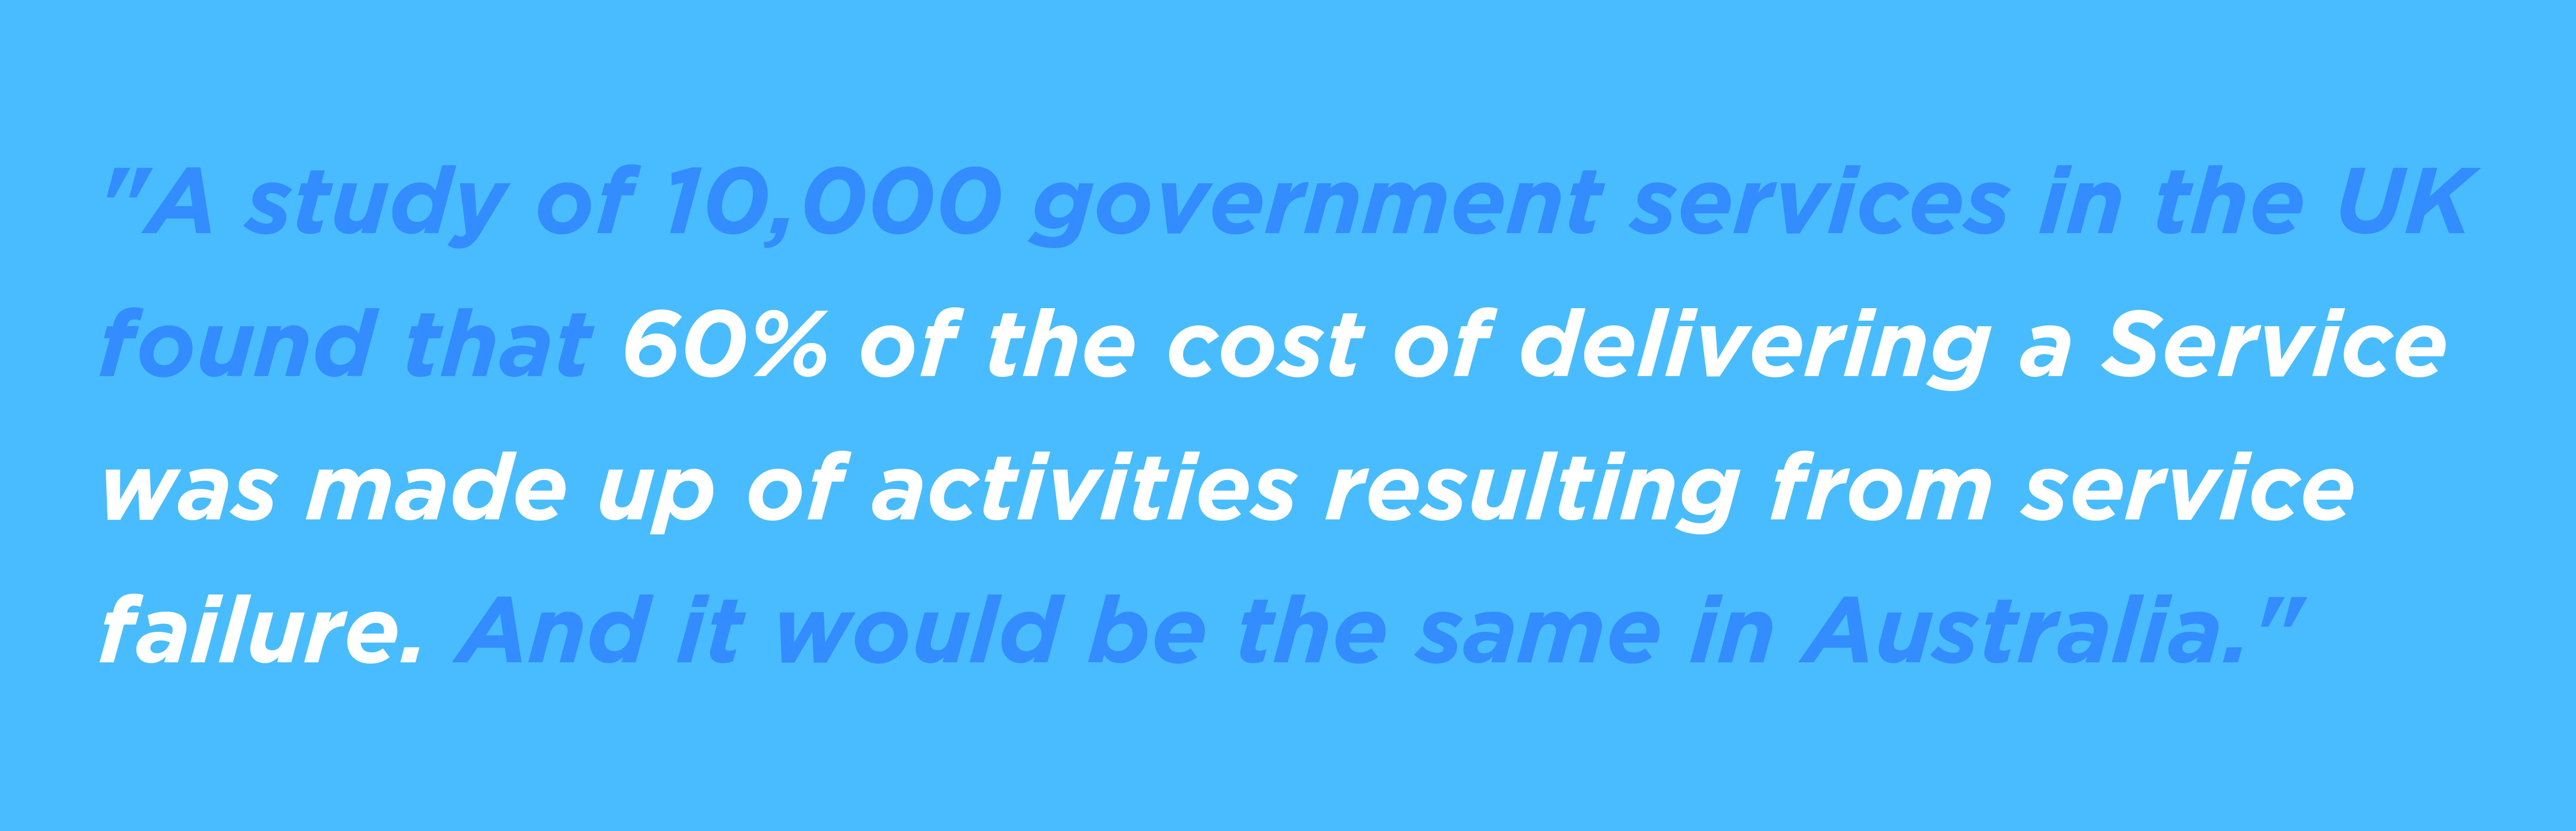 60% of the cost of delivering a Service was made up of activities resulting from service failure.